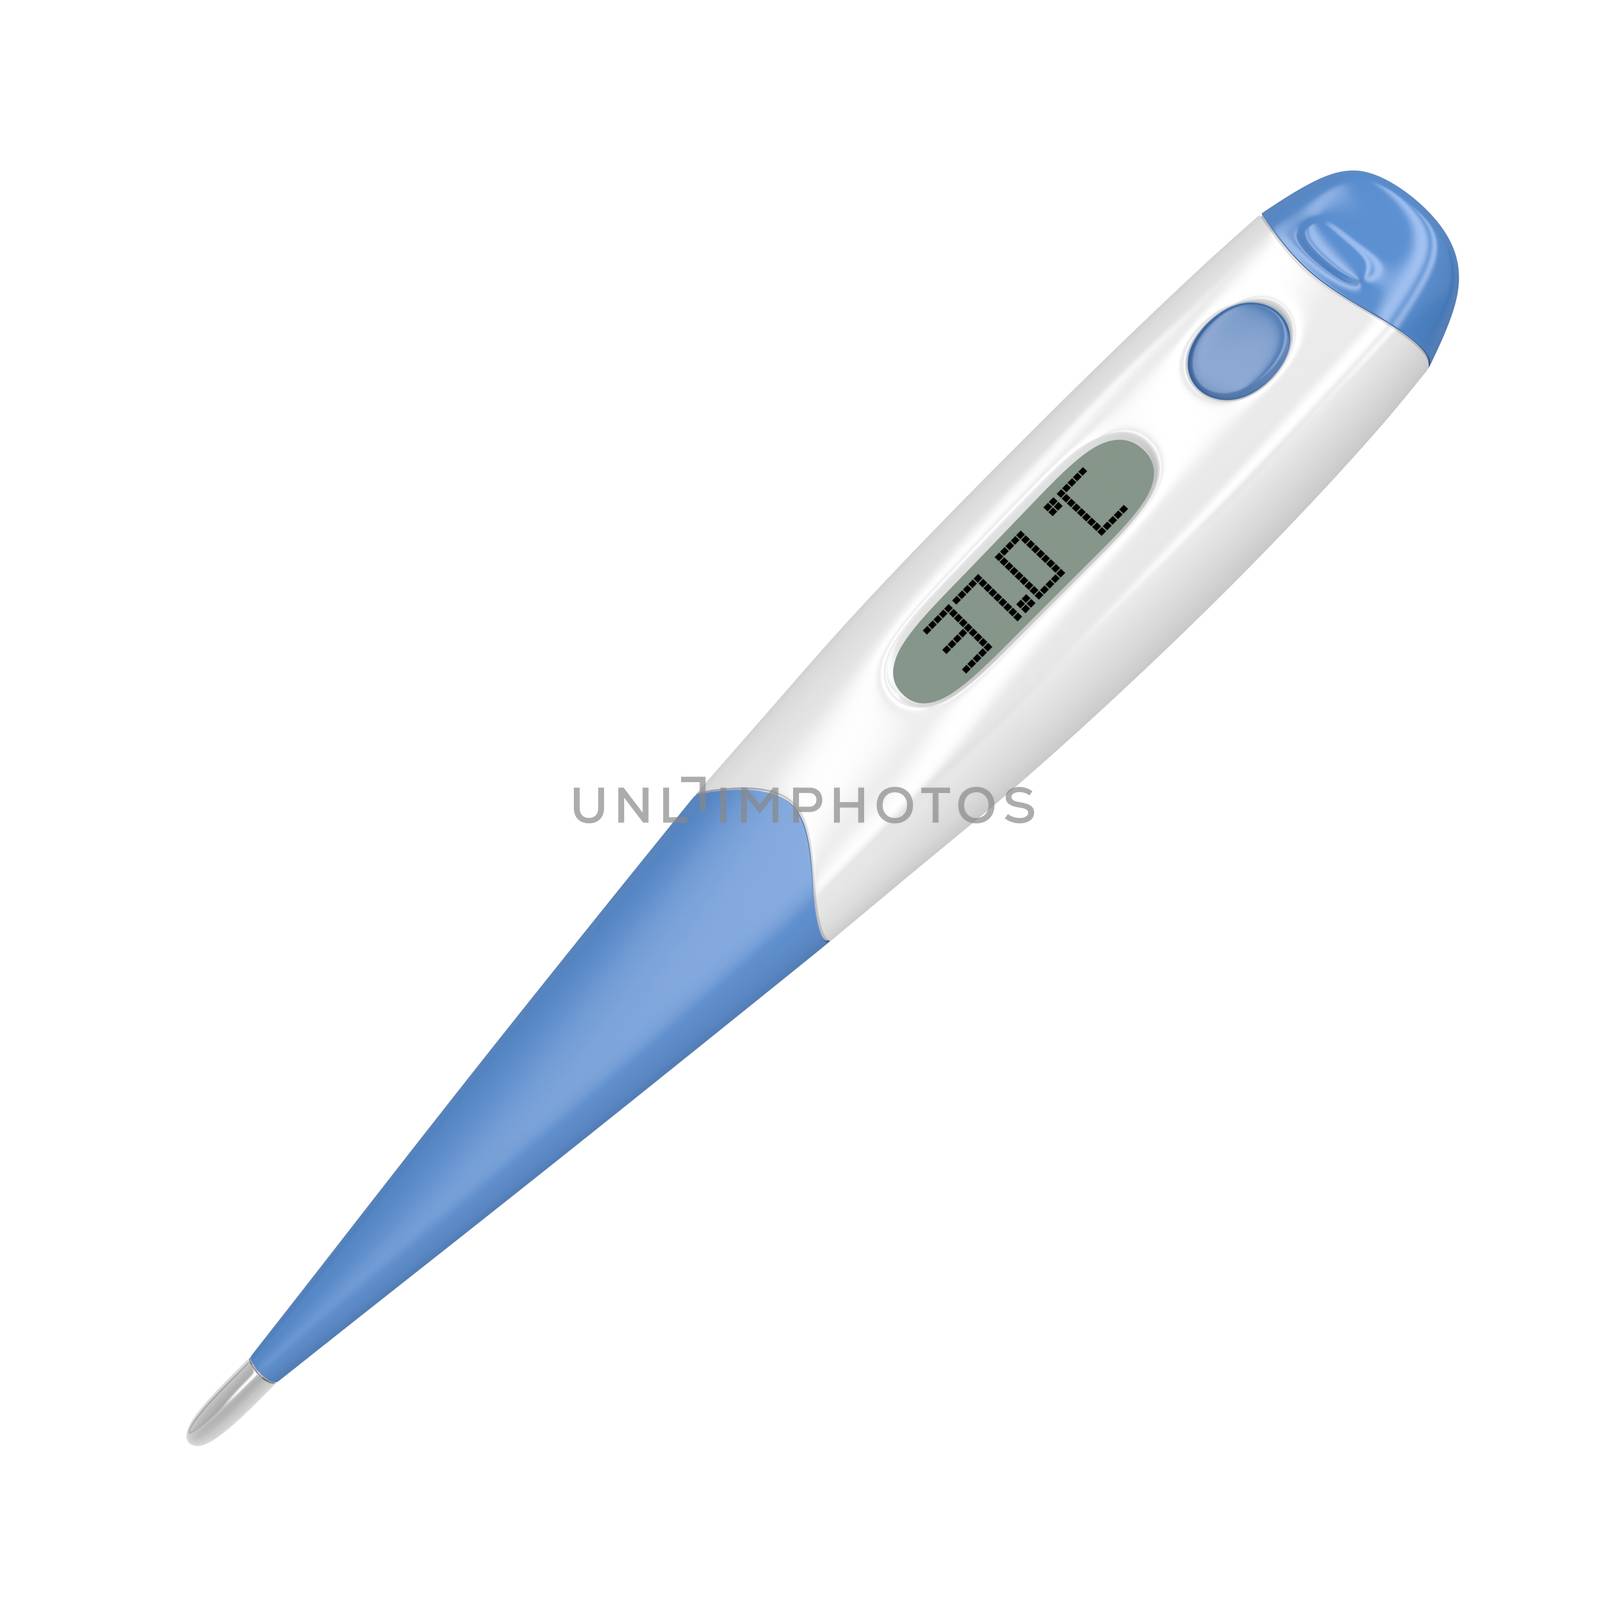 Digital thermometer by magraphics